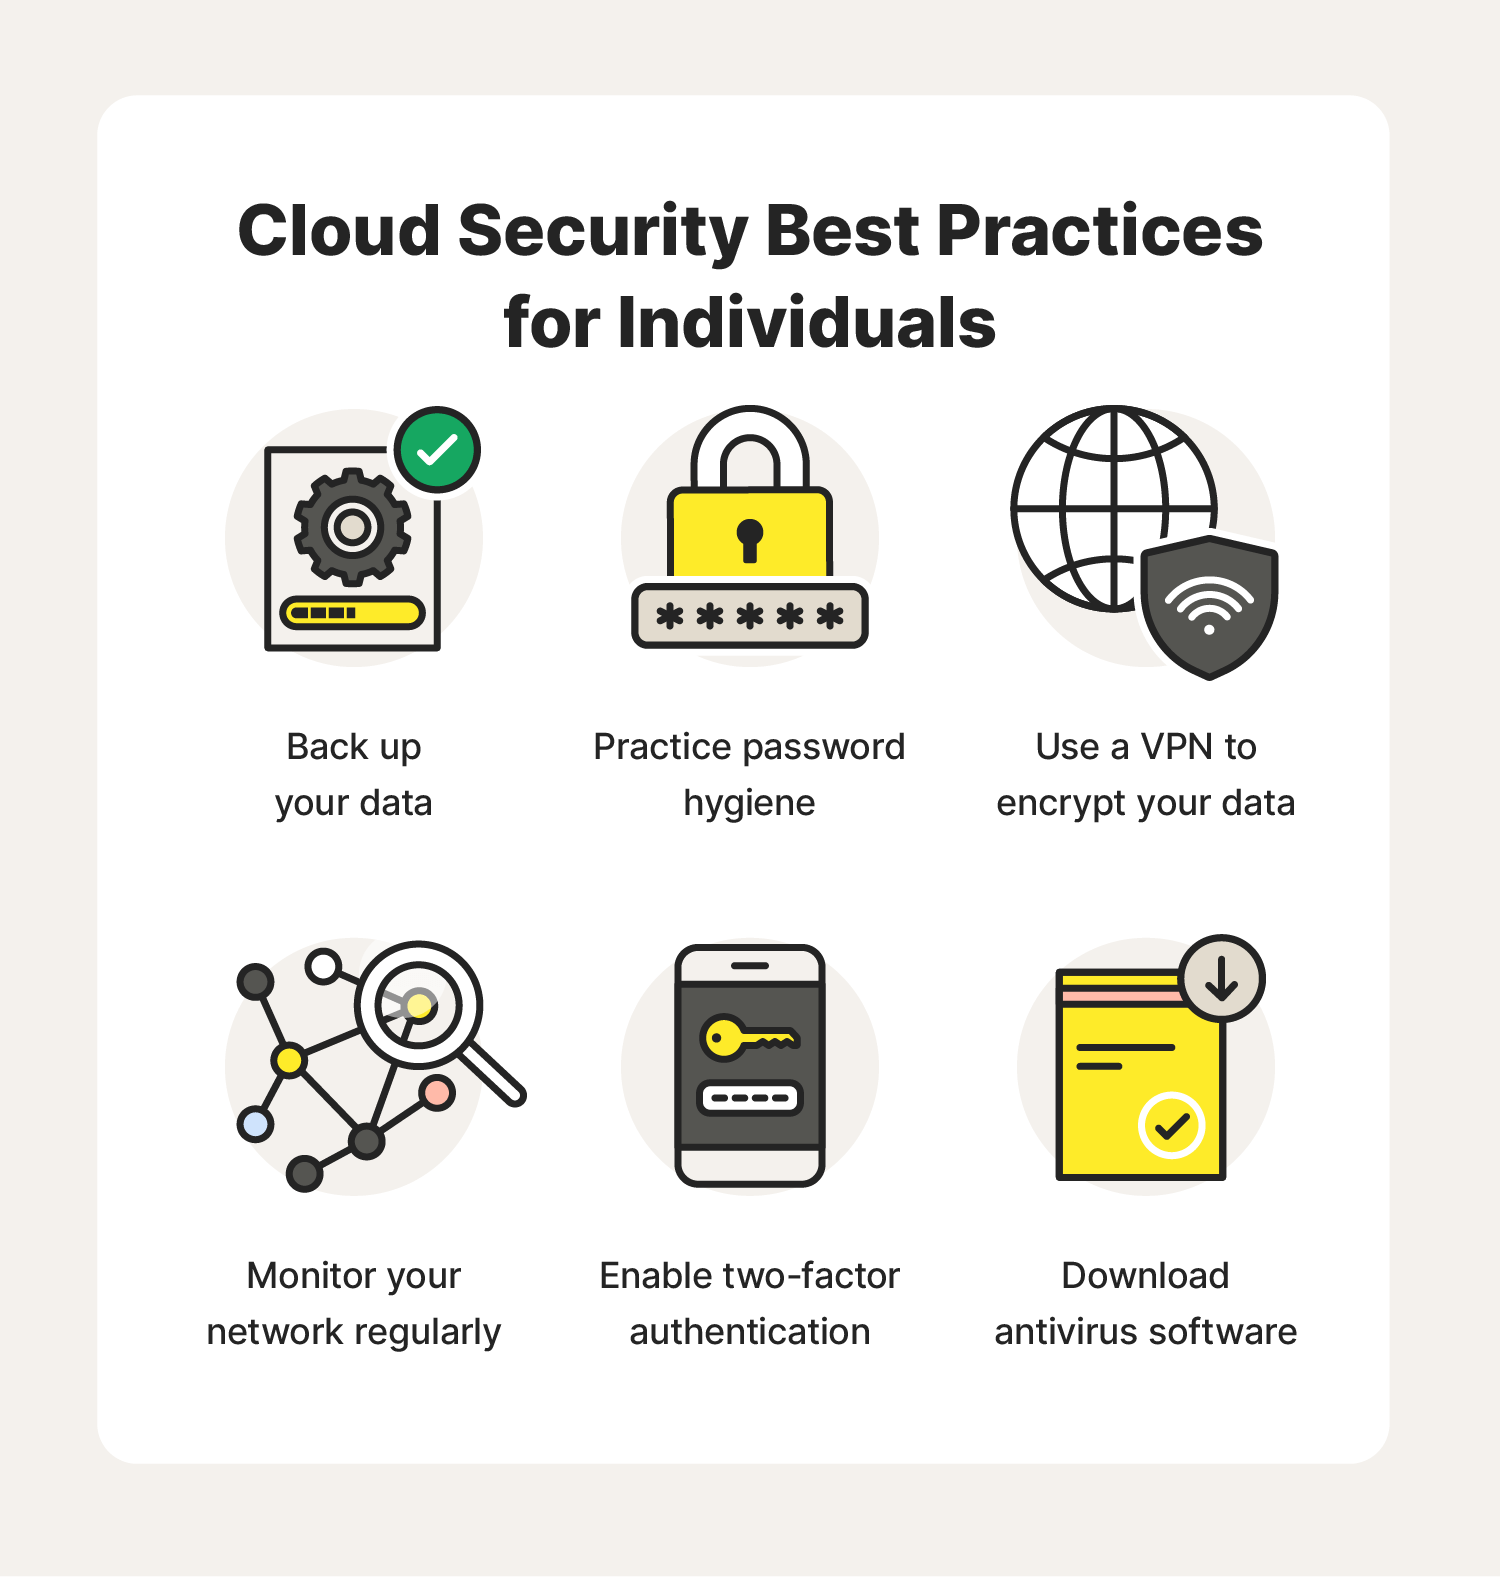  A graphic discussing cloud security best practices for individuals.